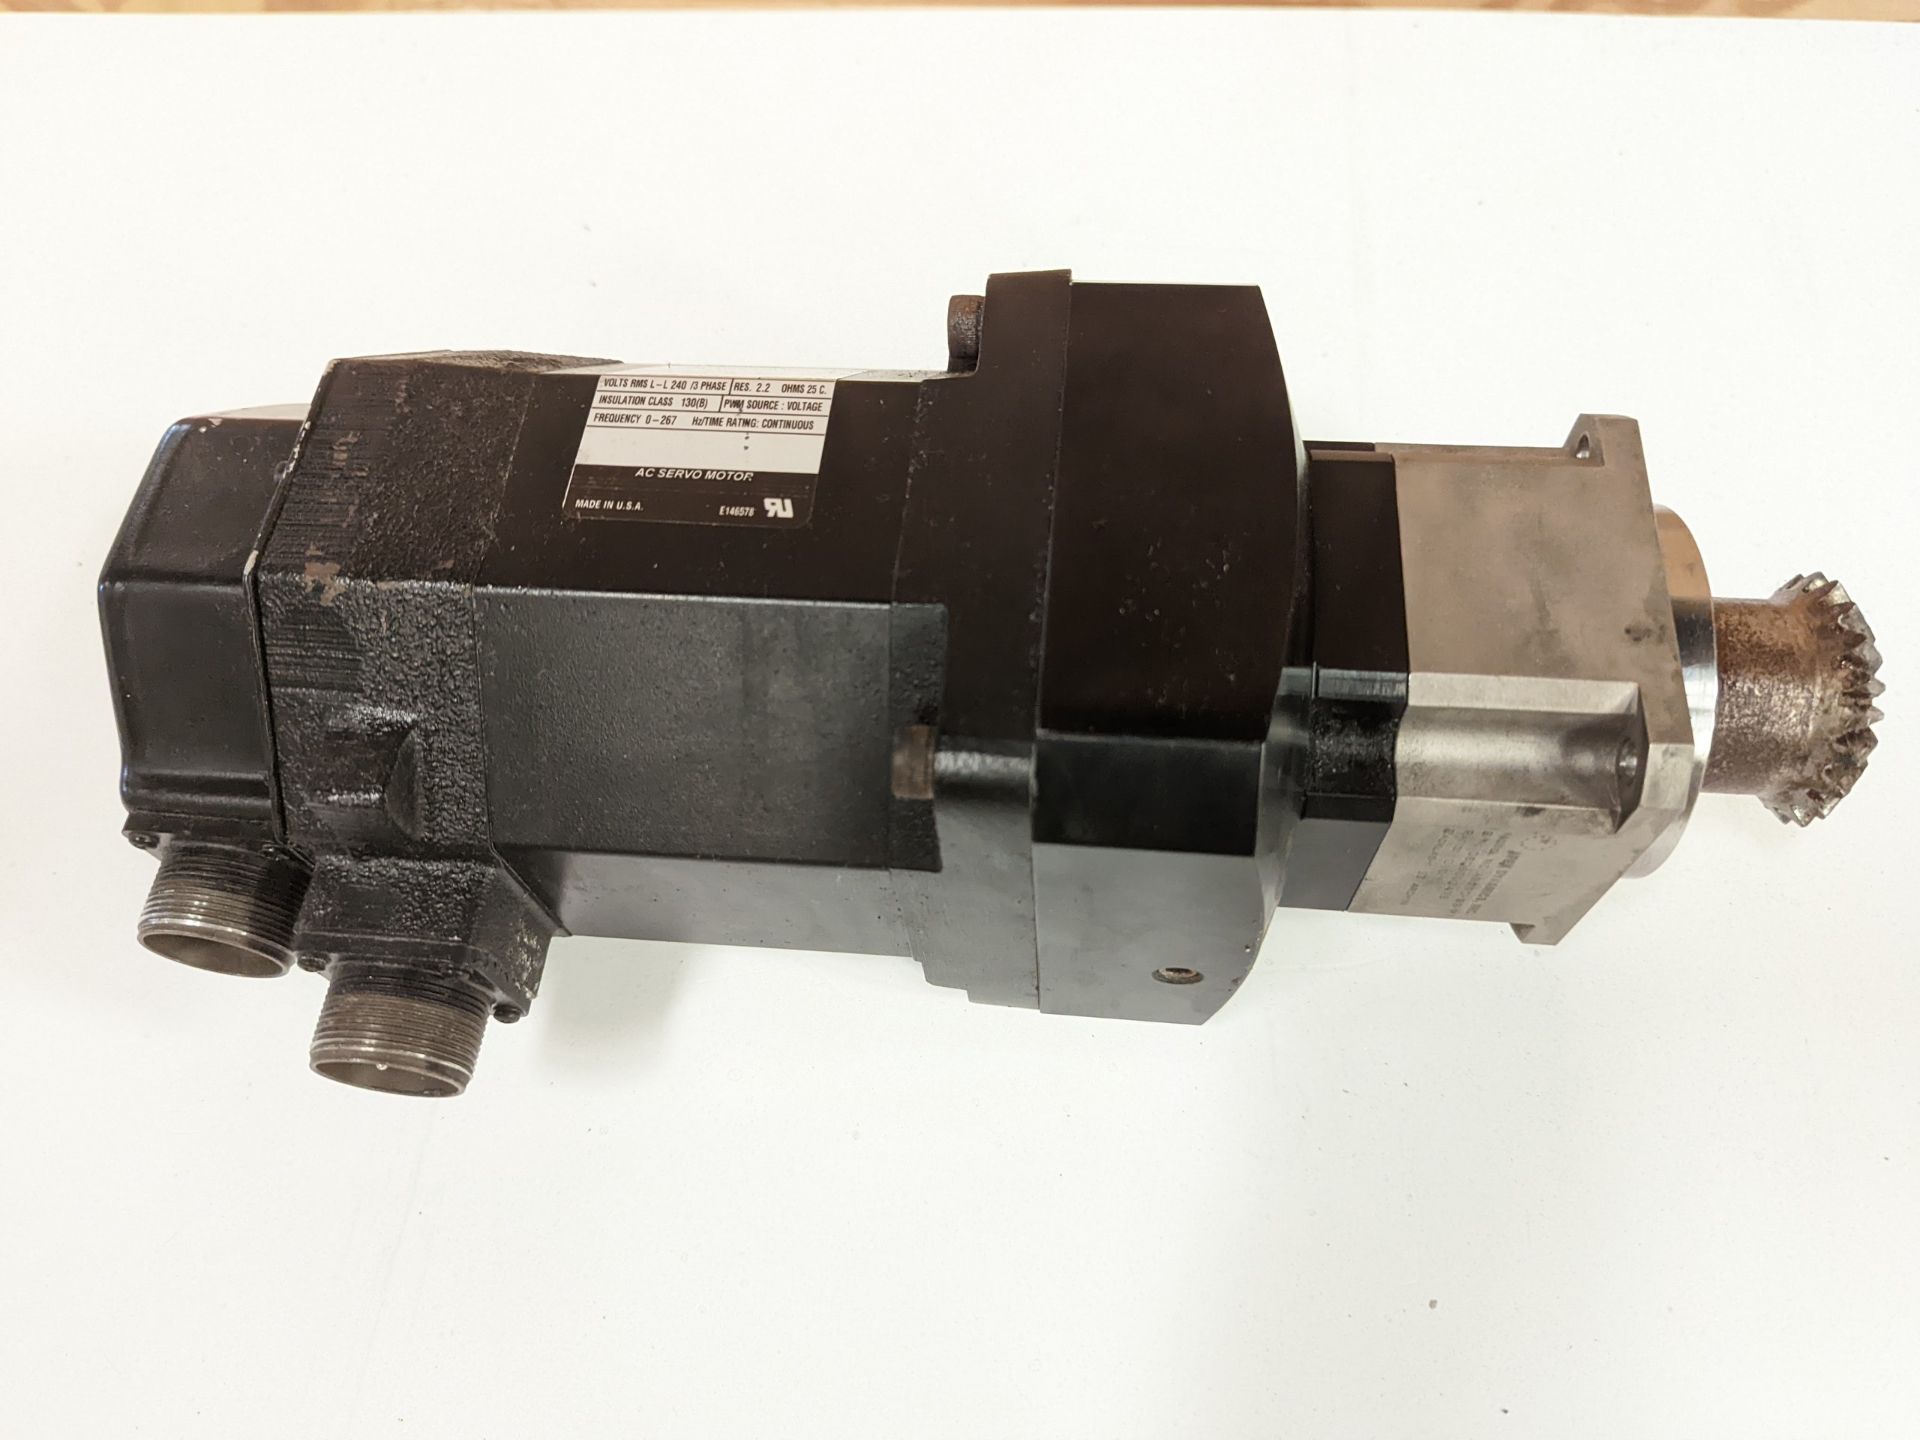 ALLEN-BRADLEY Servo Motor; Model F-4030-Q-H00AA; Max speed 4000 RPM; Includes attached APEX DYNAMICS - Image 6 of 10